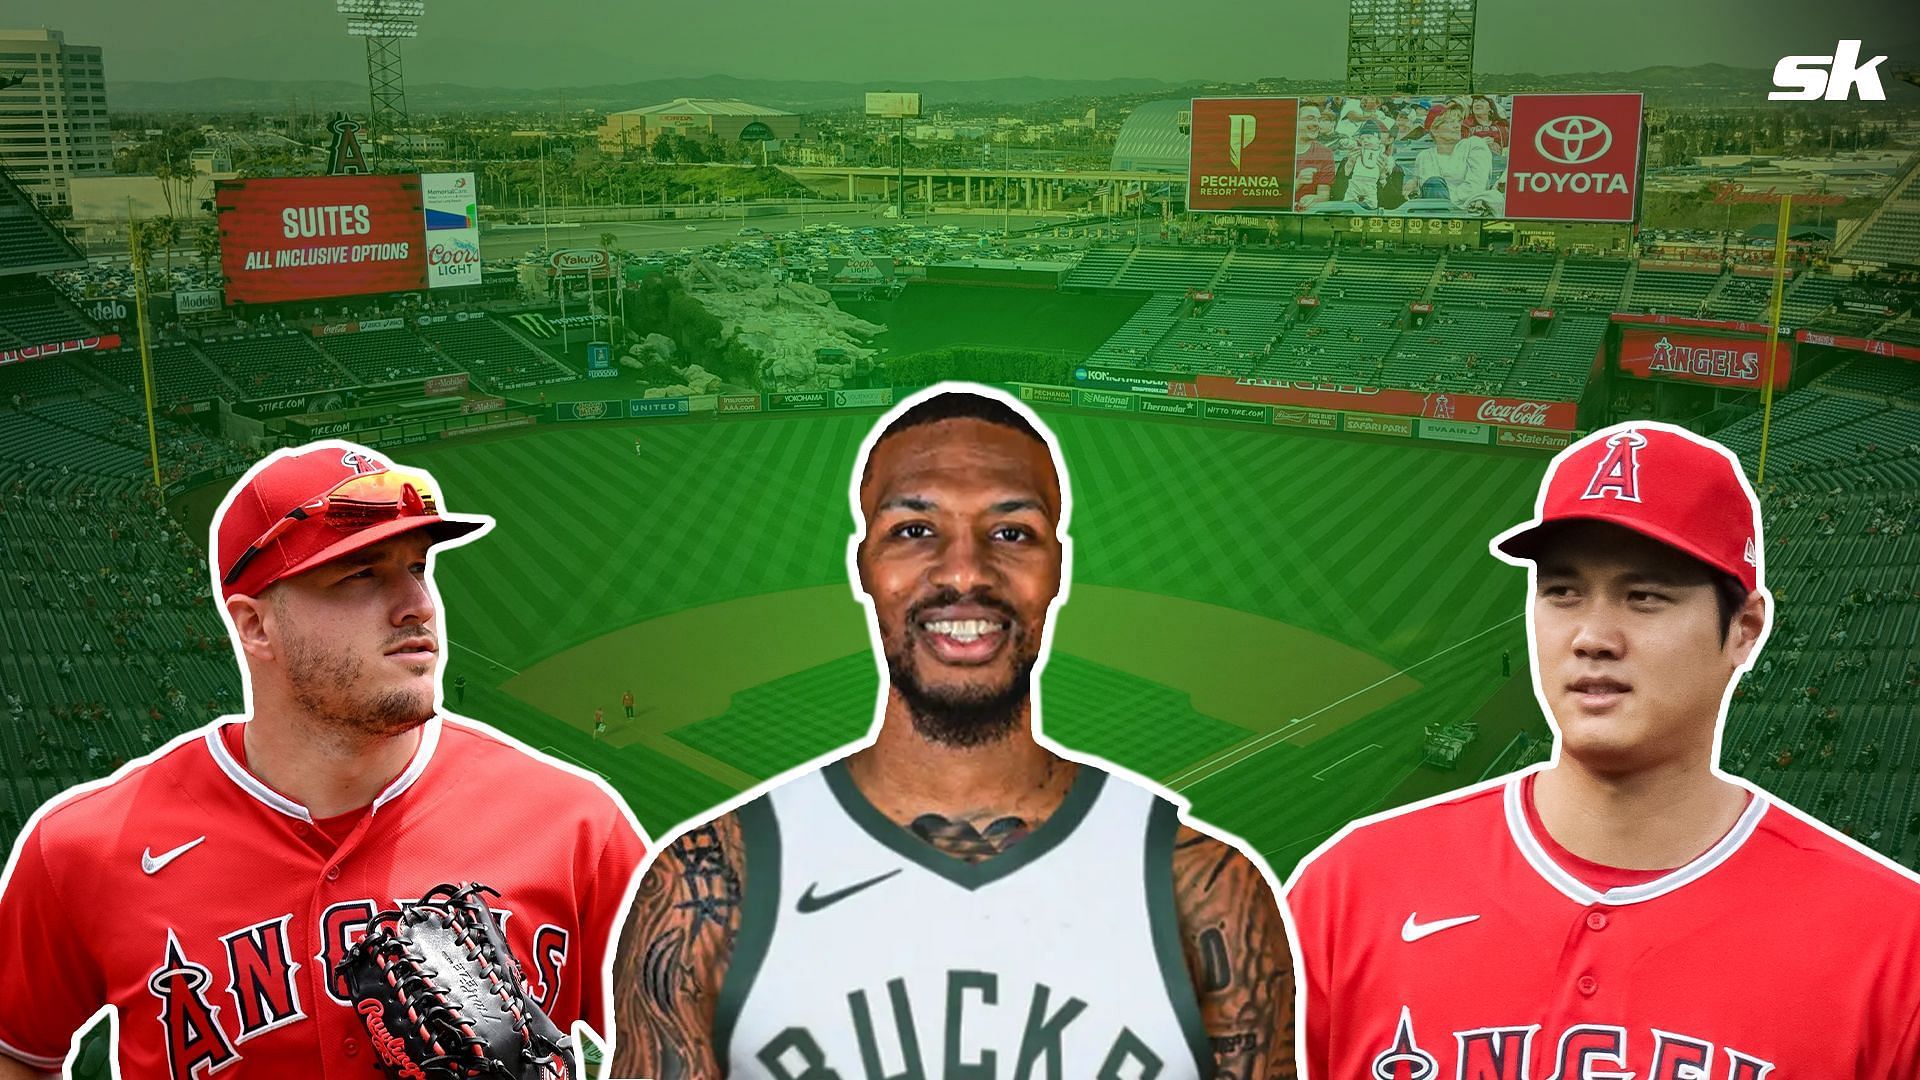 Fans deliberate what a Damian Lillard-like switch would look like in MLB fraternity: &quot;Any answers other than Trout is wrong&quot;